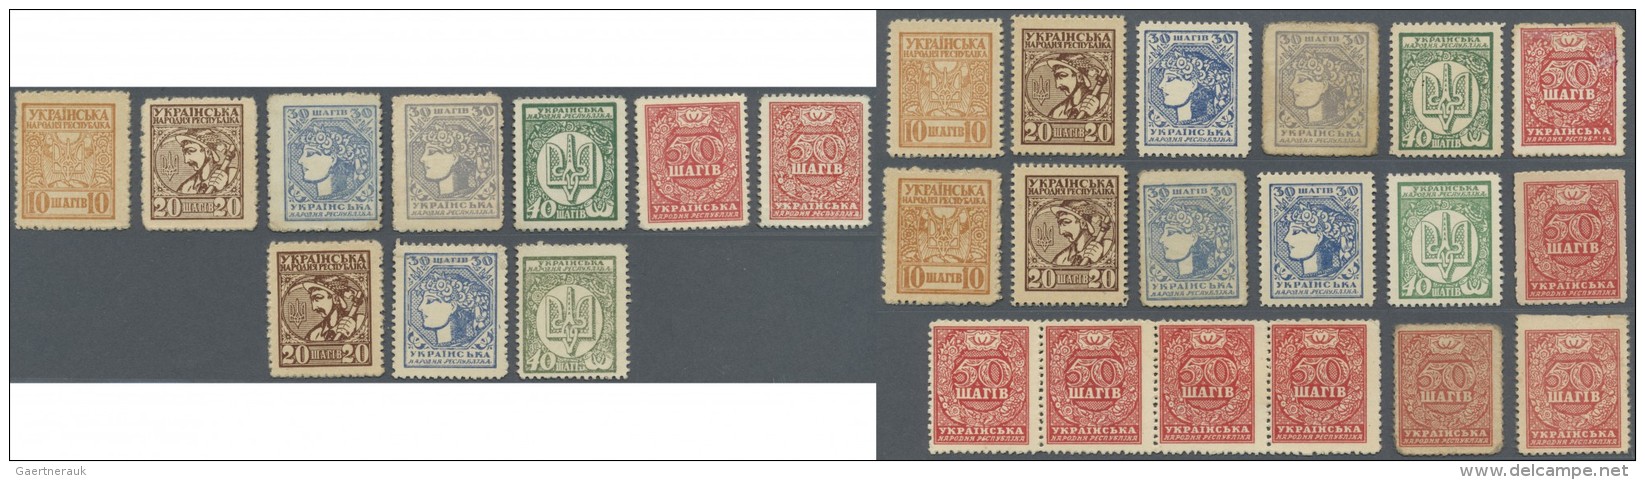 Ukraina / Ukraine: Huge Set With 28 Pcs. Of The Postage Stamp Currency Issue ND(1918) Containing 3 X 10, 4 X 20, 5 X 30 - Ukraine